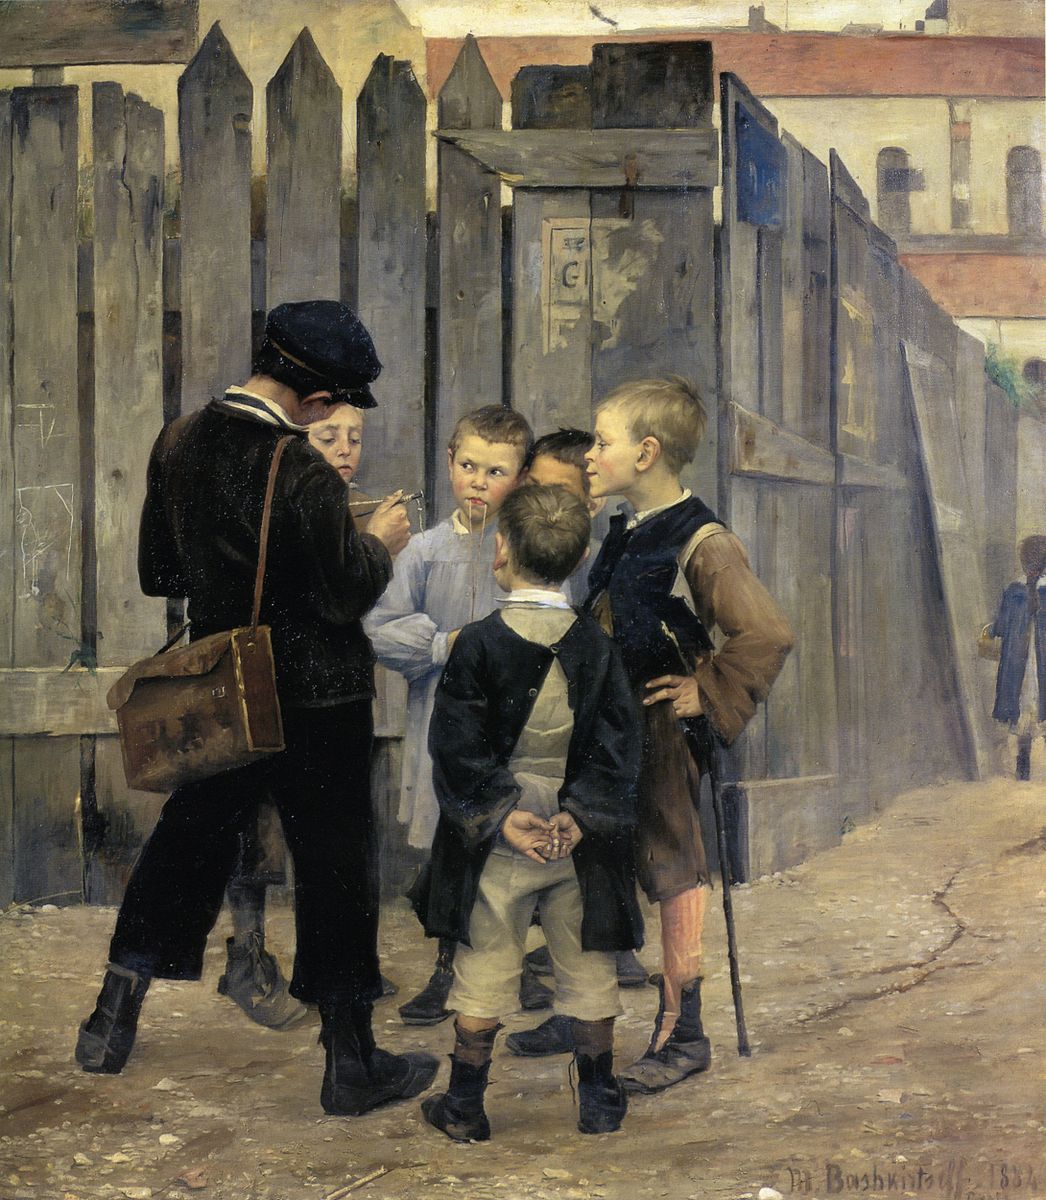 A group of young boys in a circle against a fence with a young girl to the extreme right